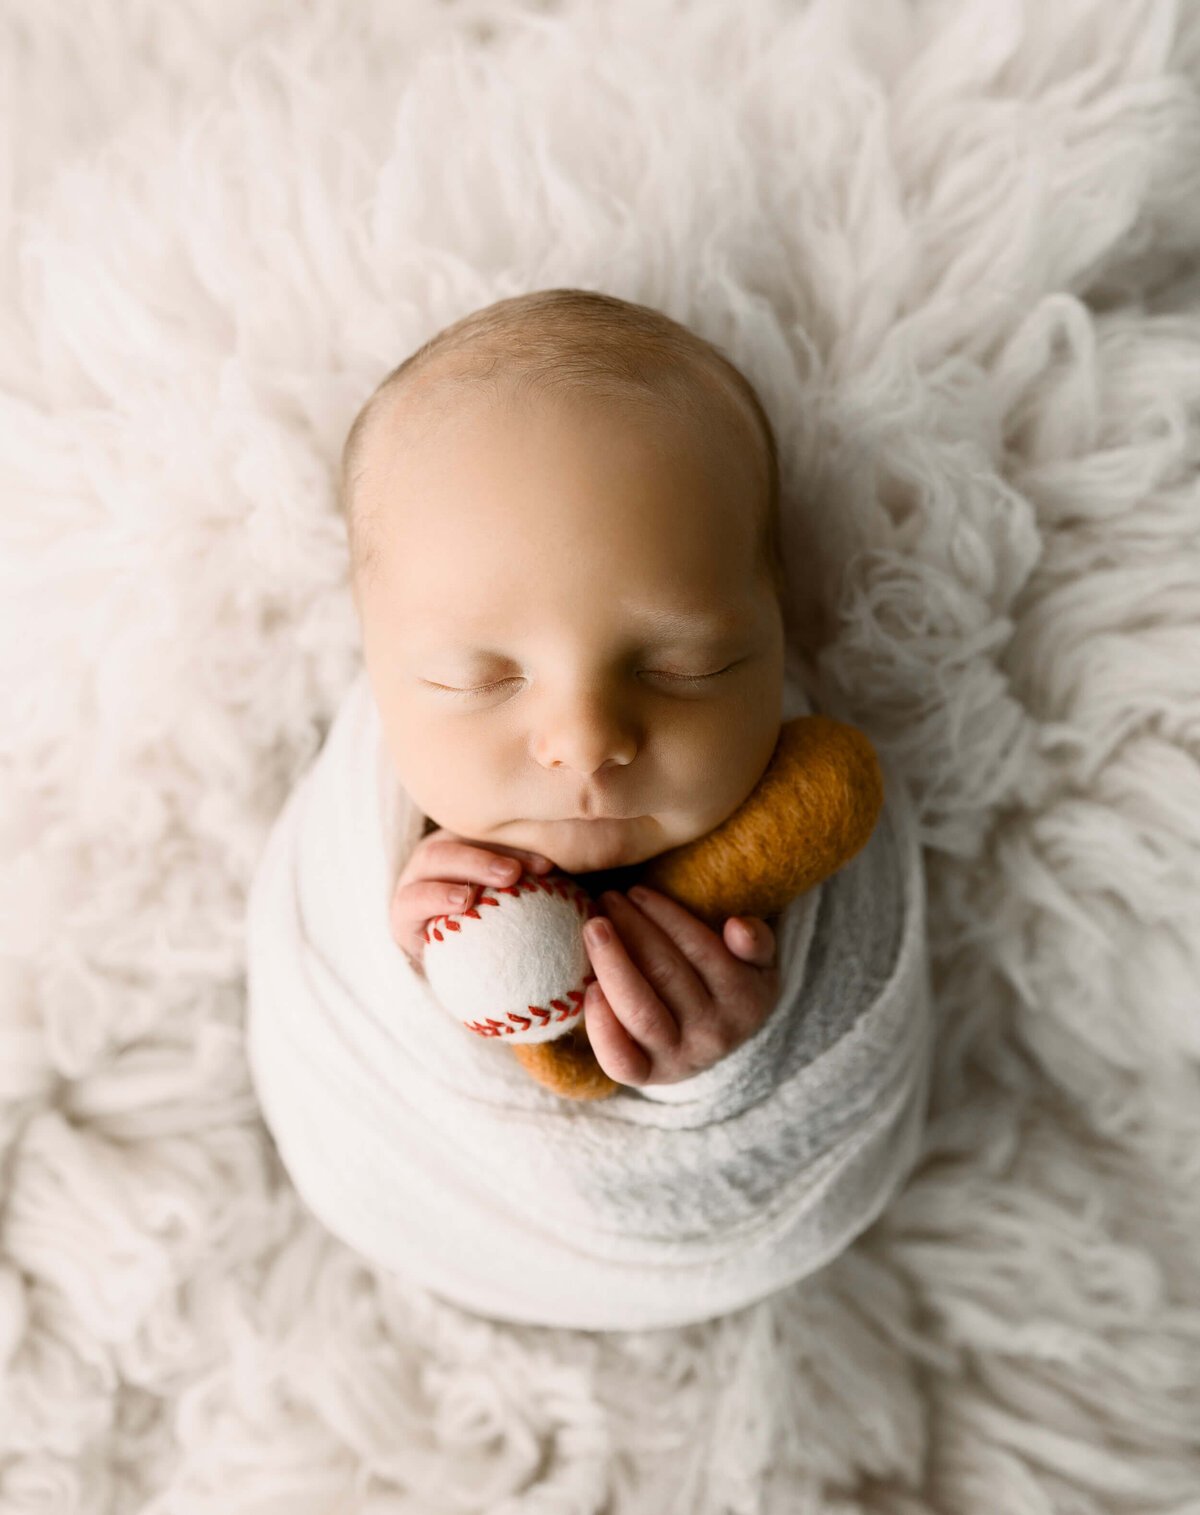 Newborn baby boy wrapped and holding a baseball and bat